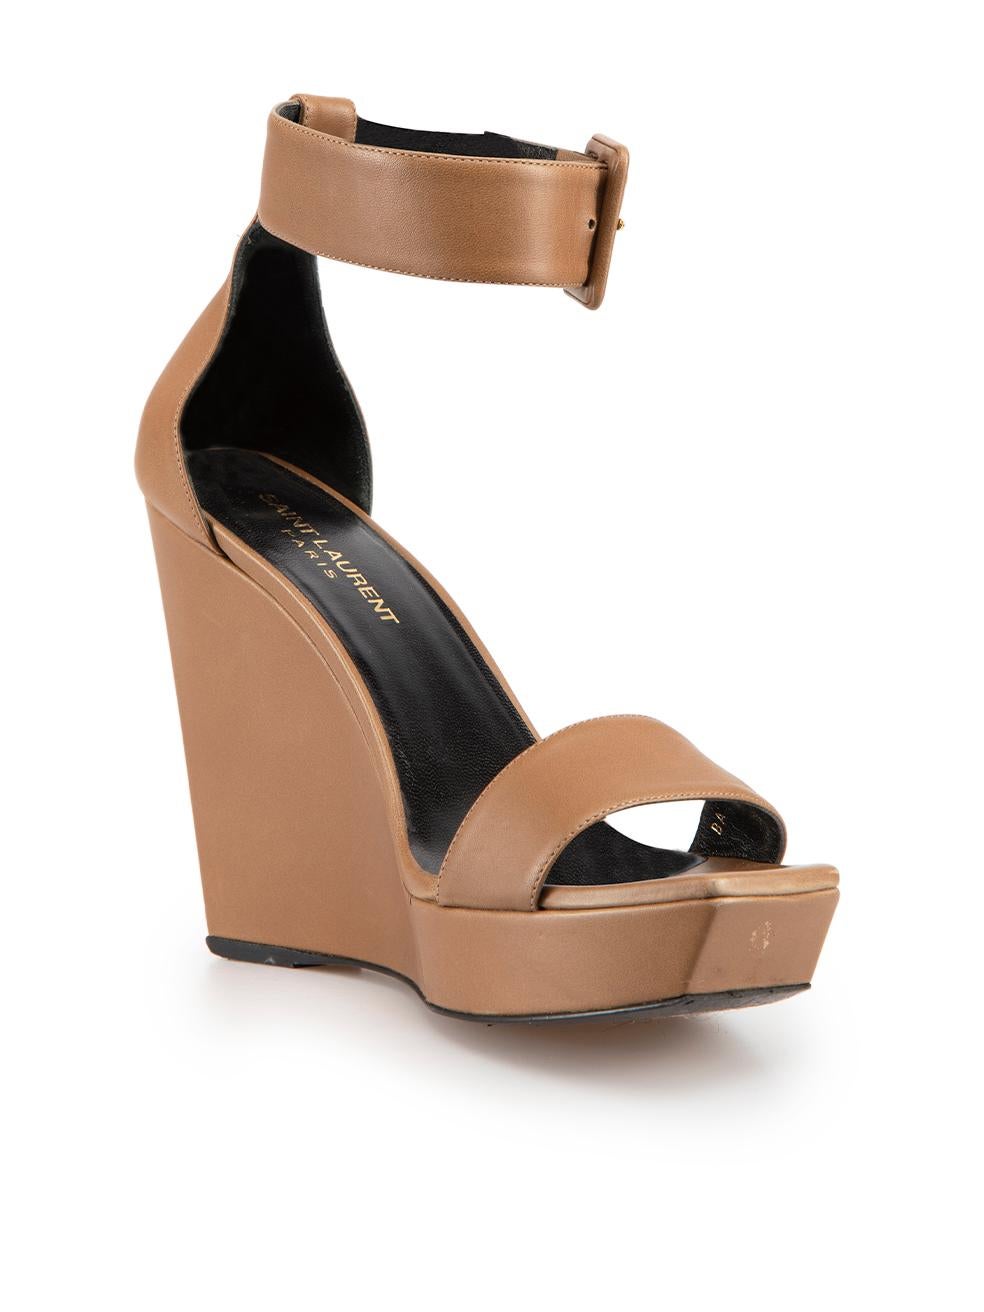 CONDITION is Very good. Minimal wear to shoes is evident. Minimal wear to both sides of both shoe wedge heels with light abrasions to the leather on this used Saint Laurent designer resale item.
 
Details
Brown
Leather
Wedge sandals
High